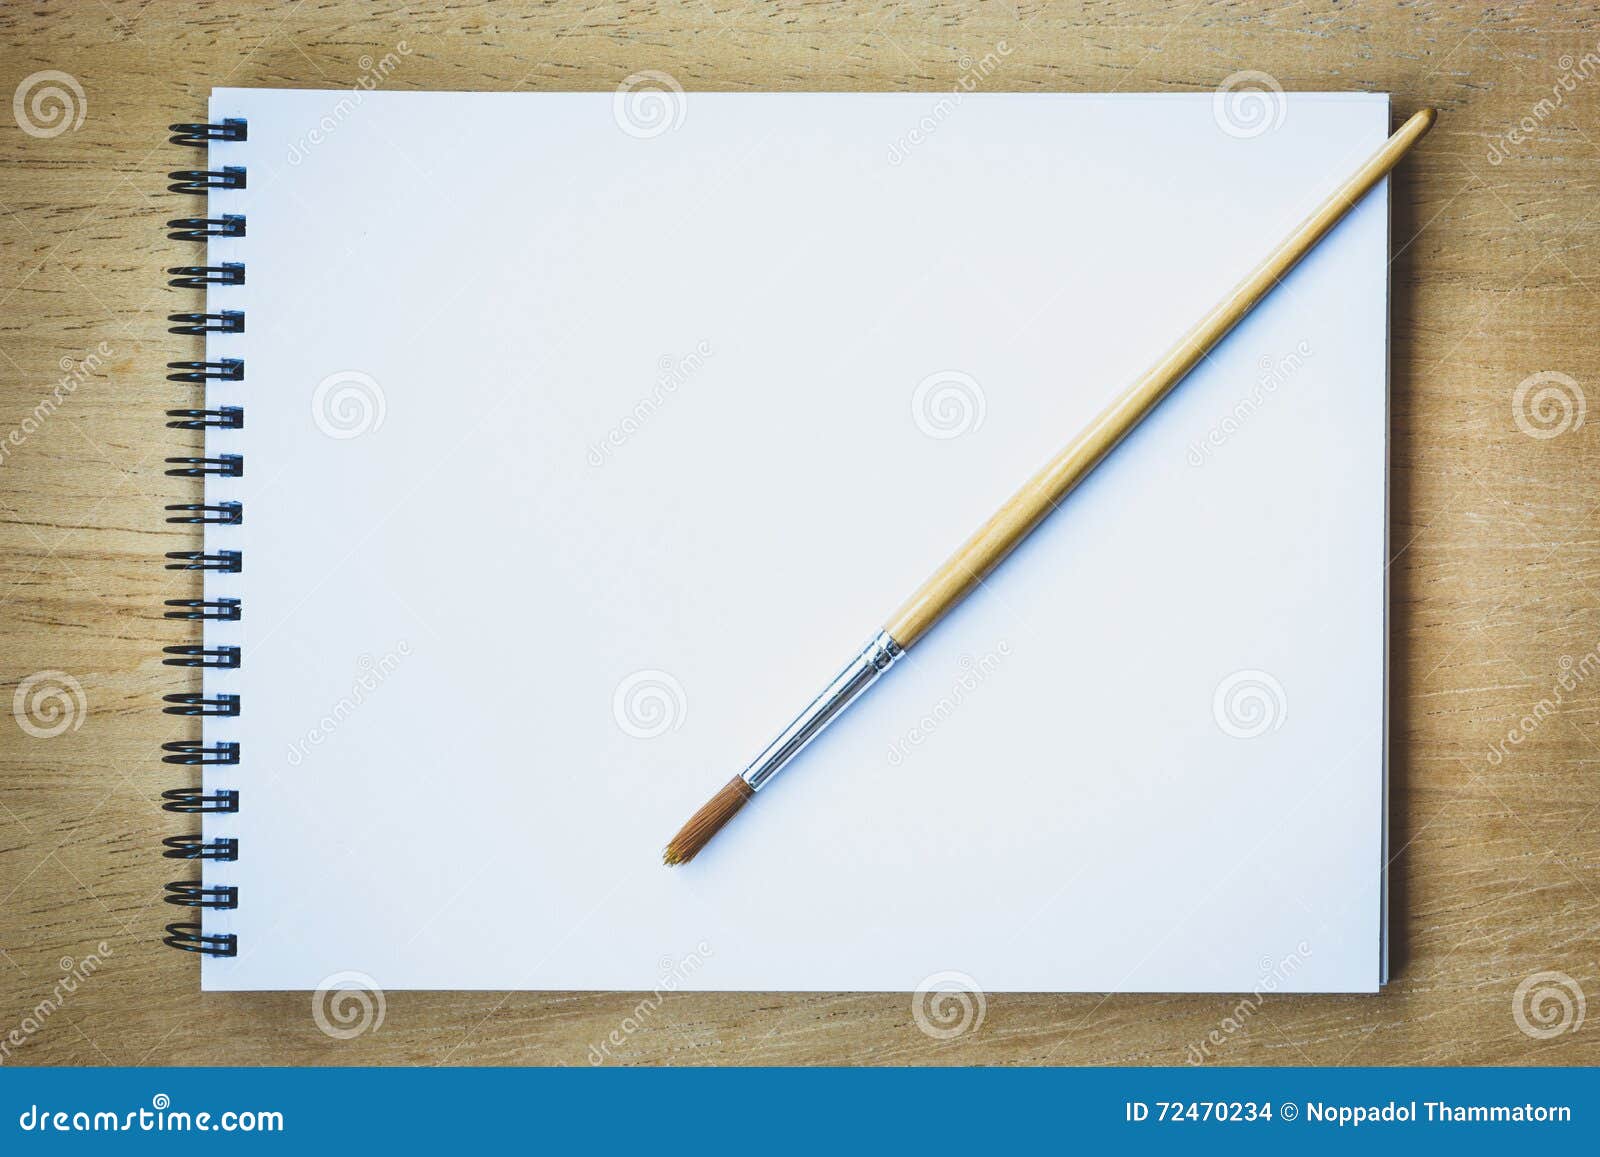 Paintbrush on Blank Drawing Paper Book Stock Photo - Image of design,  artist: 72470234